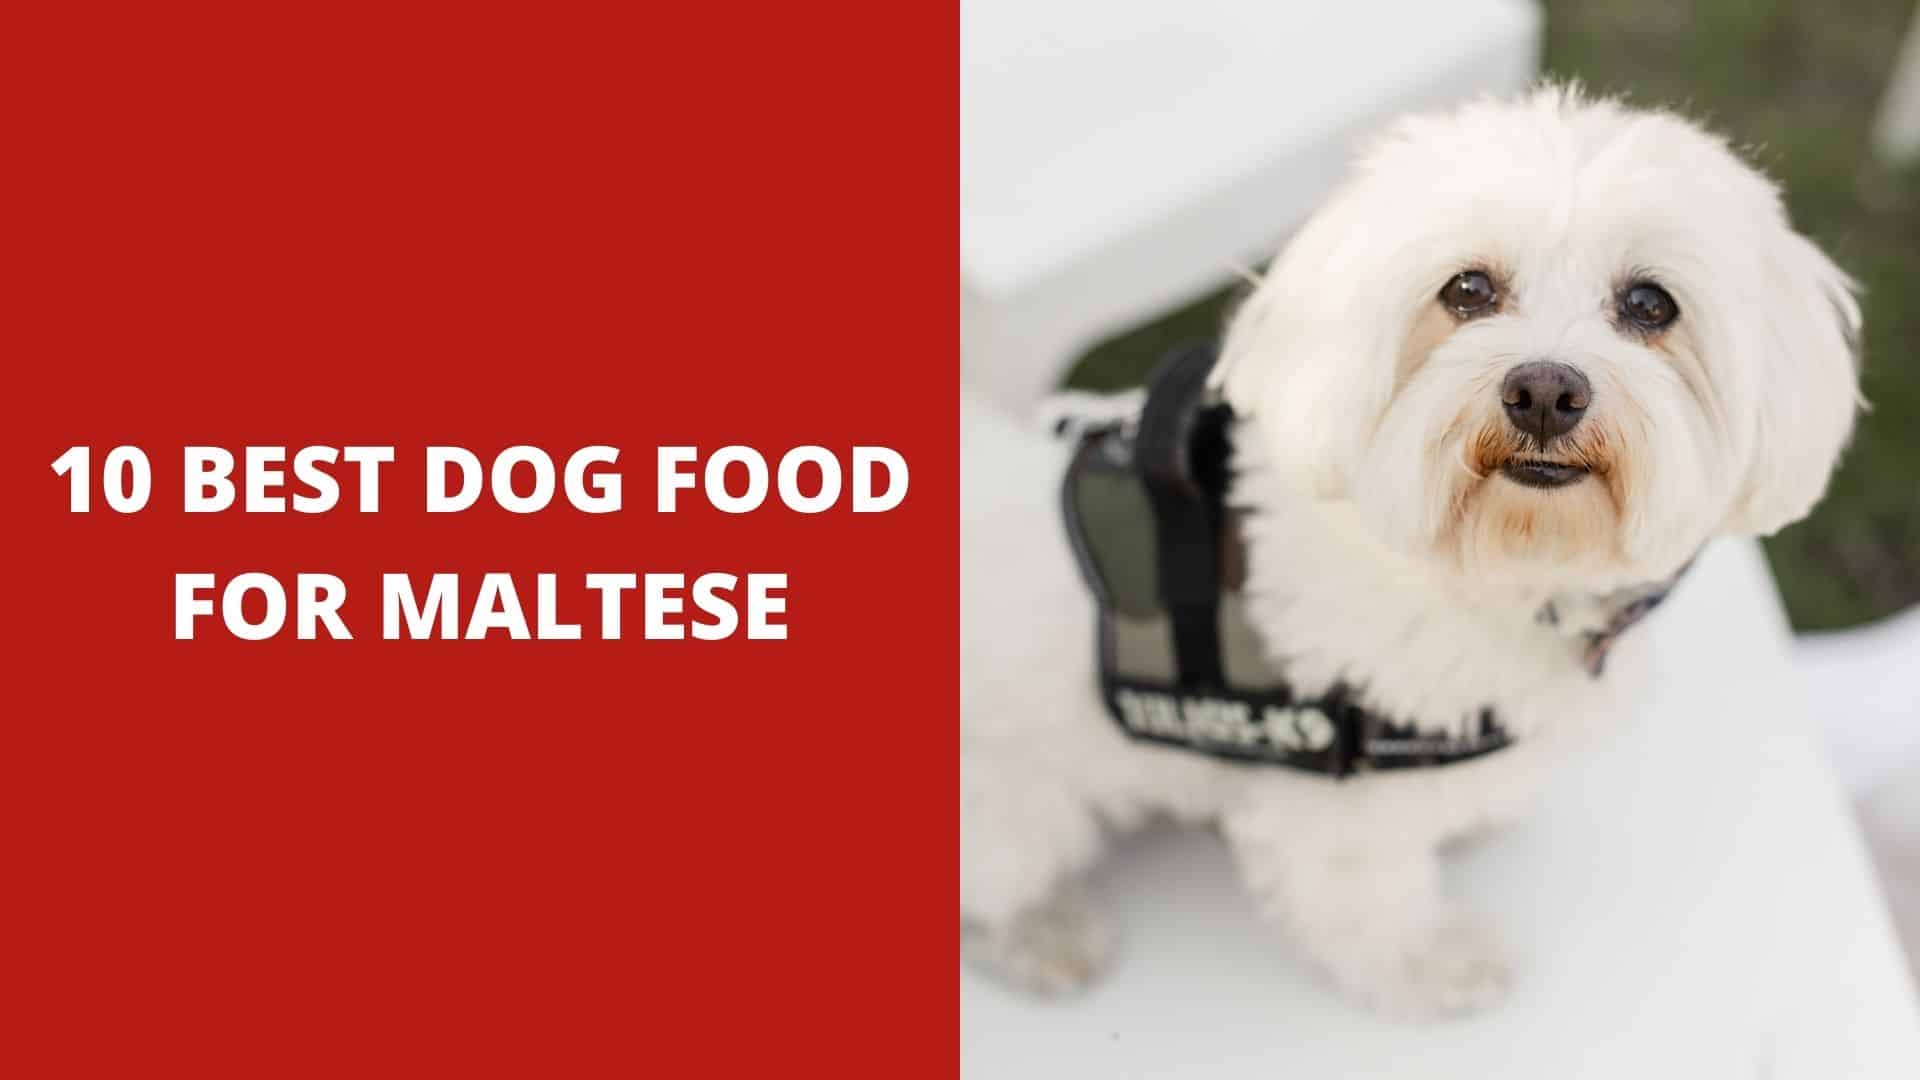 10 Best Dog Food for Maltese (2022 Review)